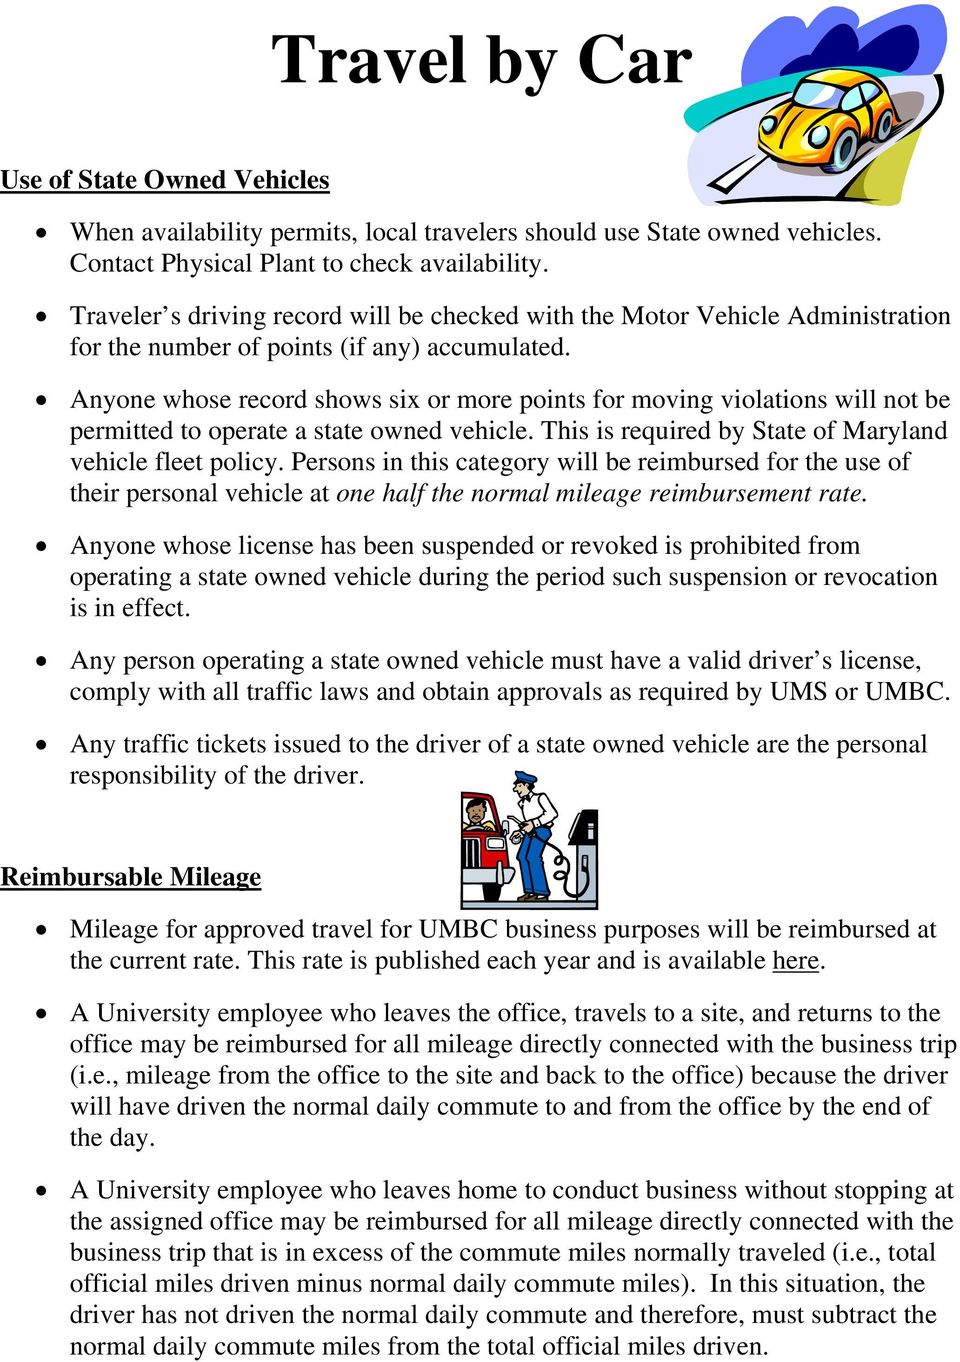 Anyone whose record shows six or more points for moving violations will not be permitted to operate a state owned vehicle. This is required by State of Maryland vehicle fleet policy.